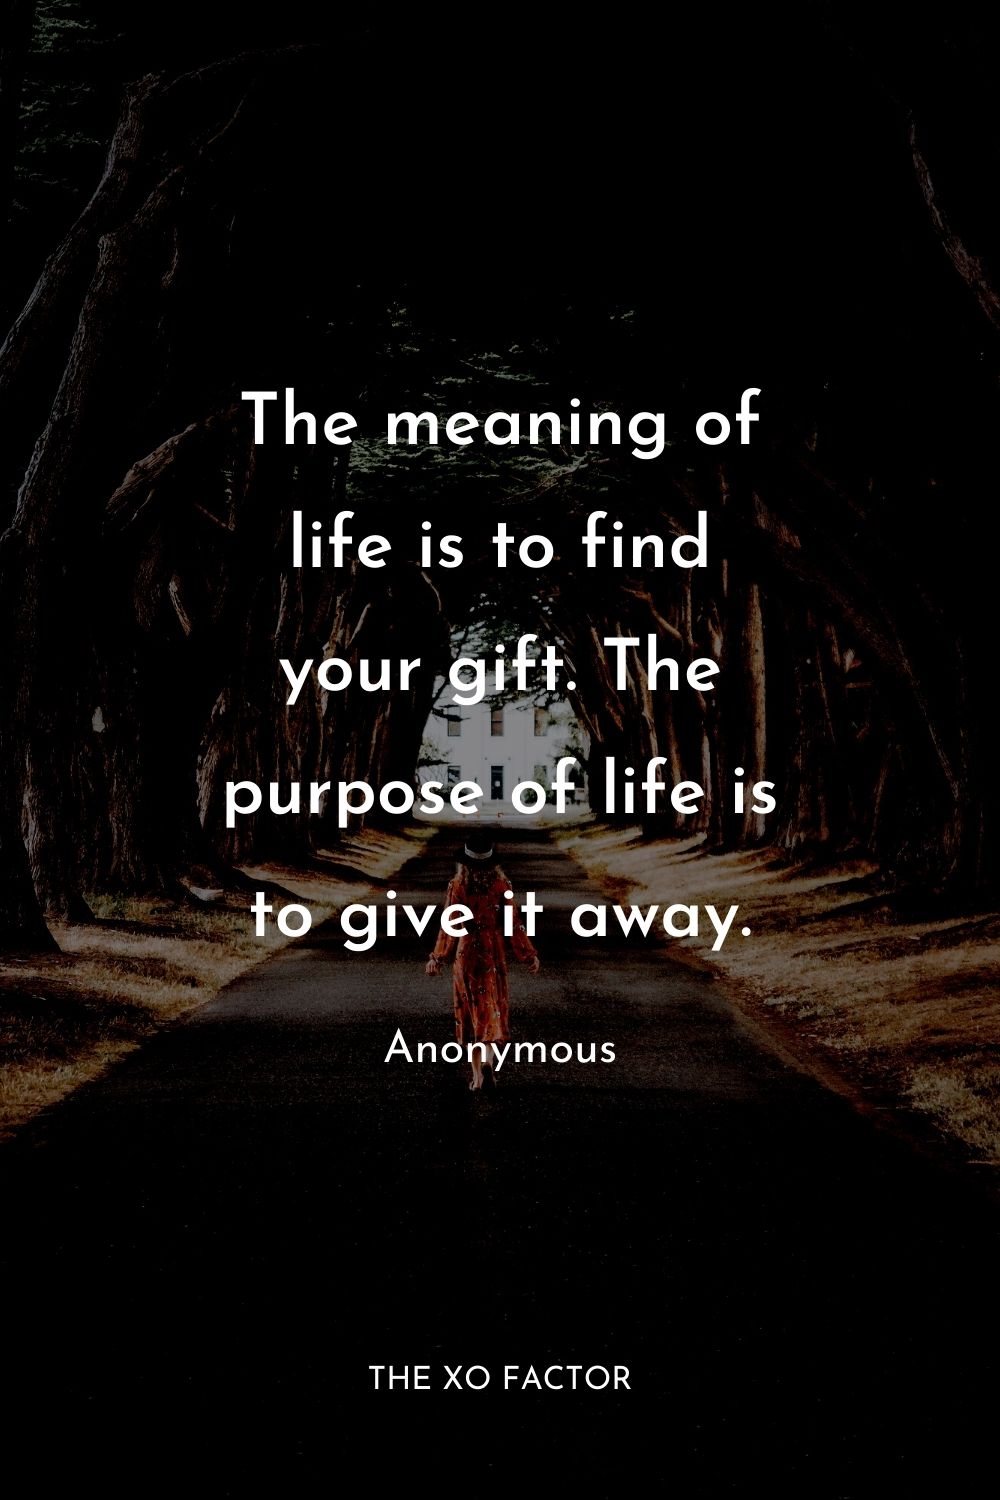 The meaning of life is to find your gift. The purpose of life is to give it away.